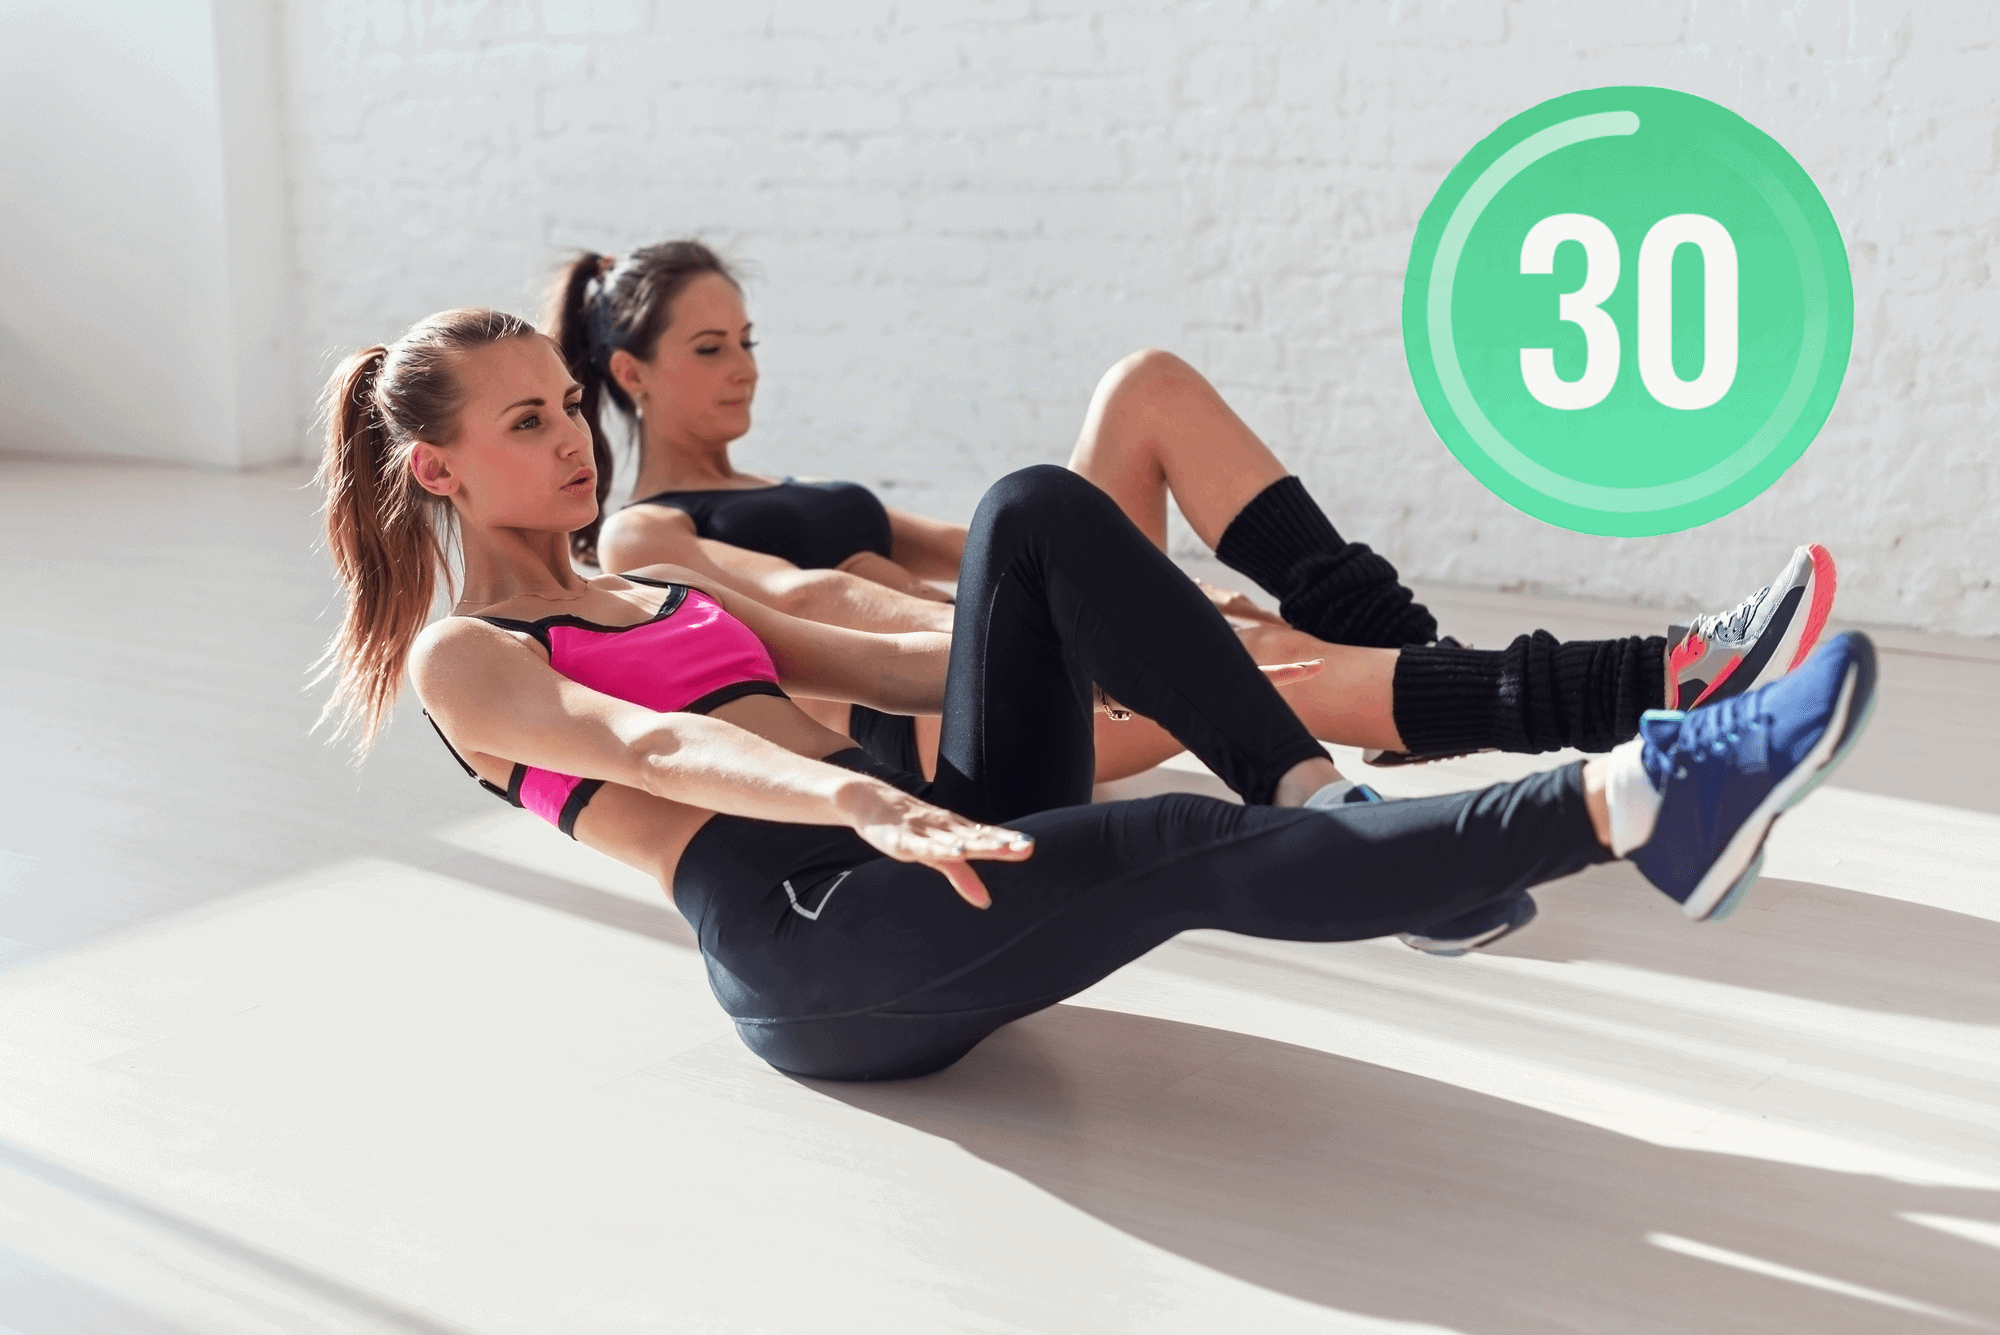 5 Day Free Workout Programs At Home App for Build Muscle